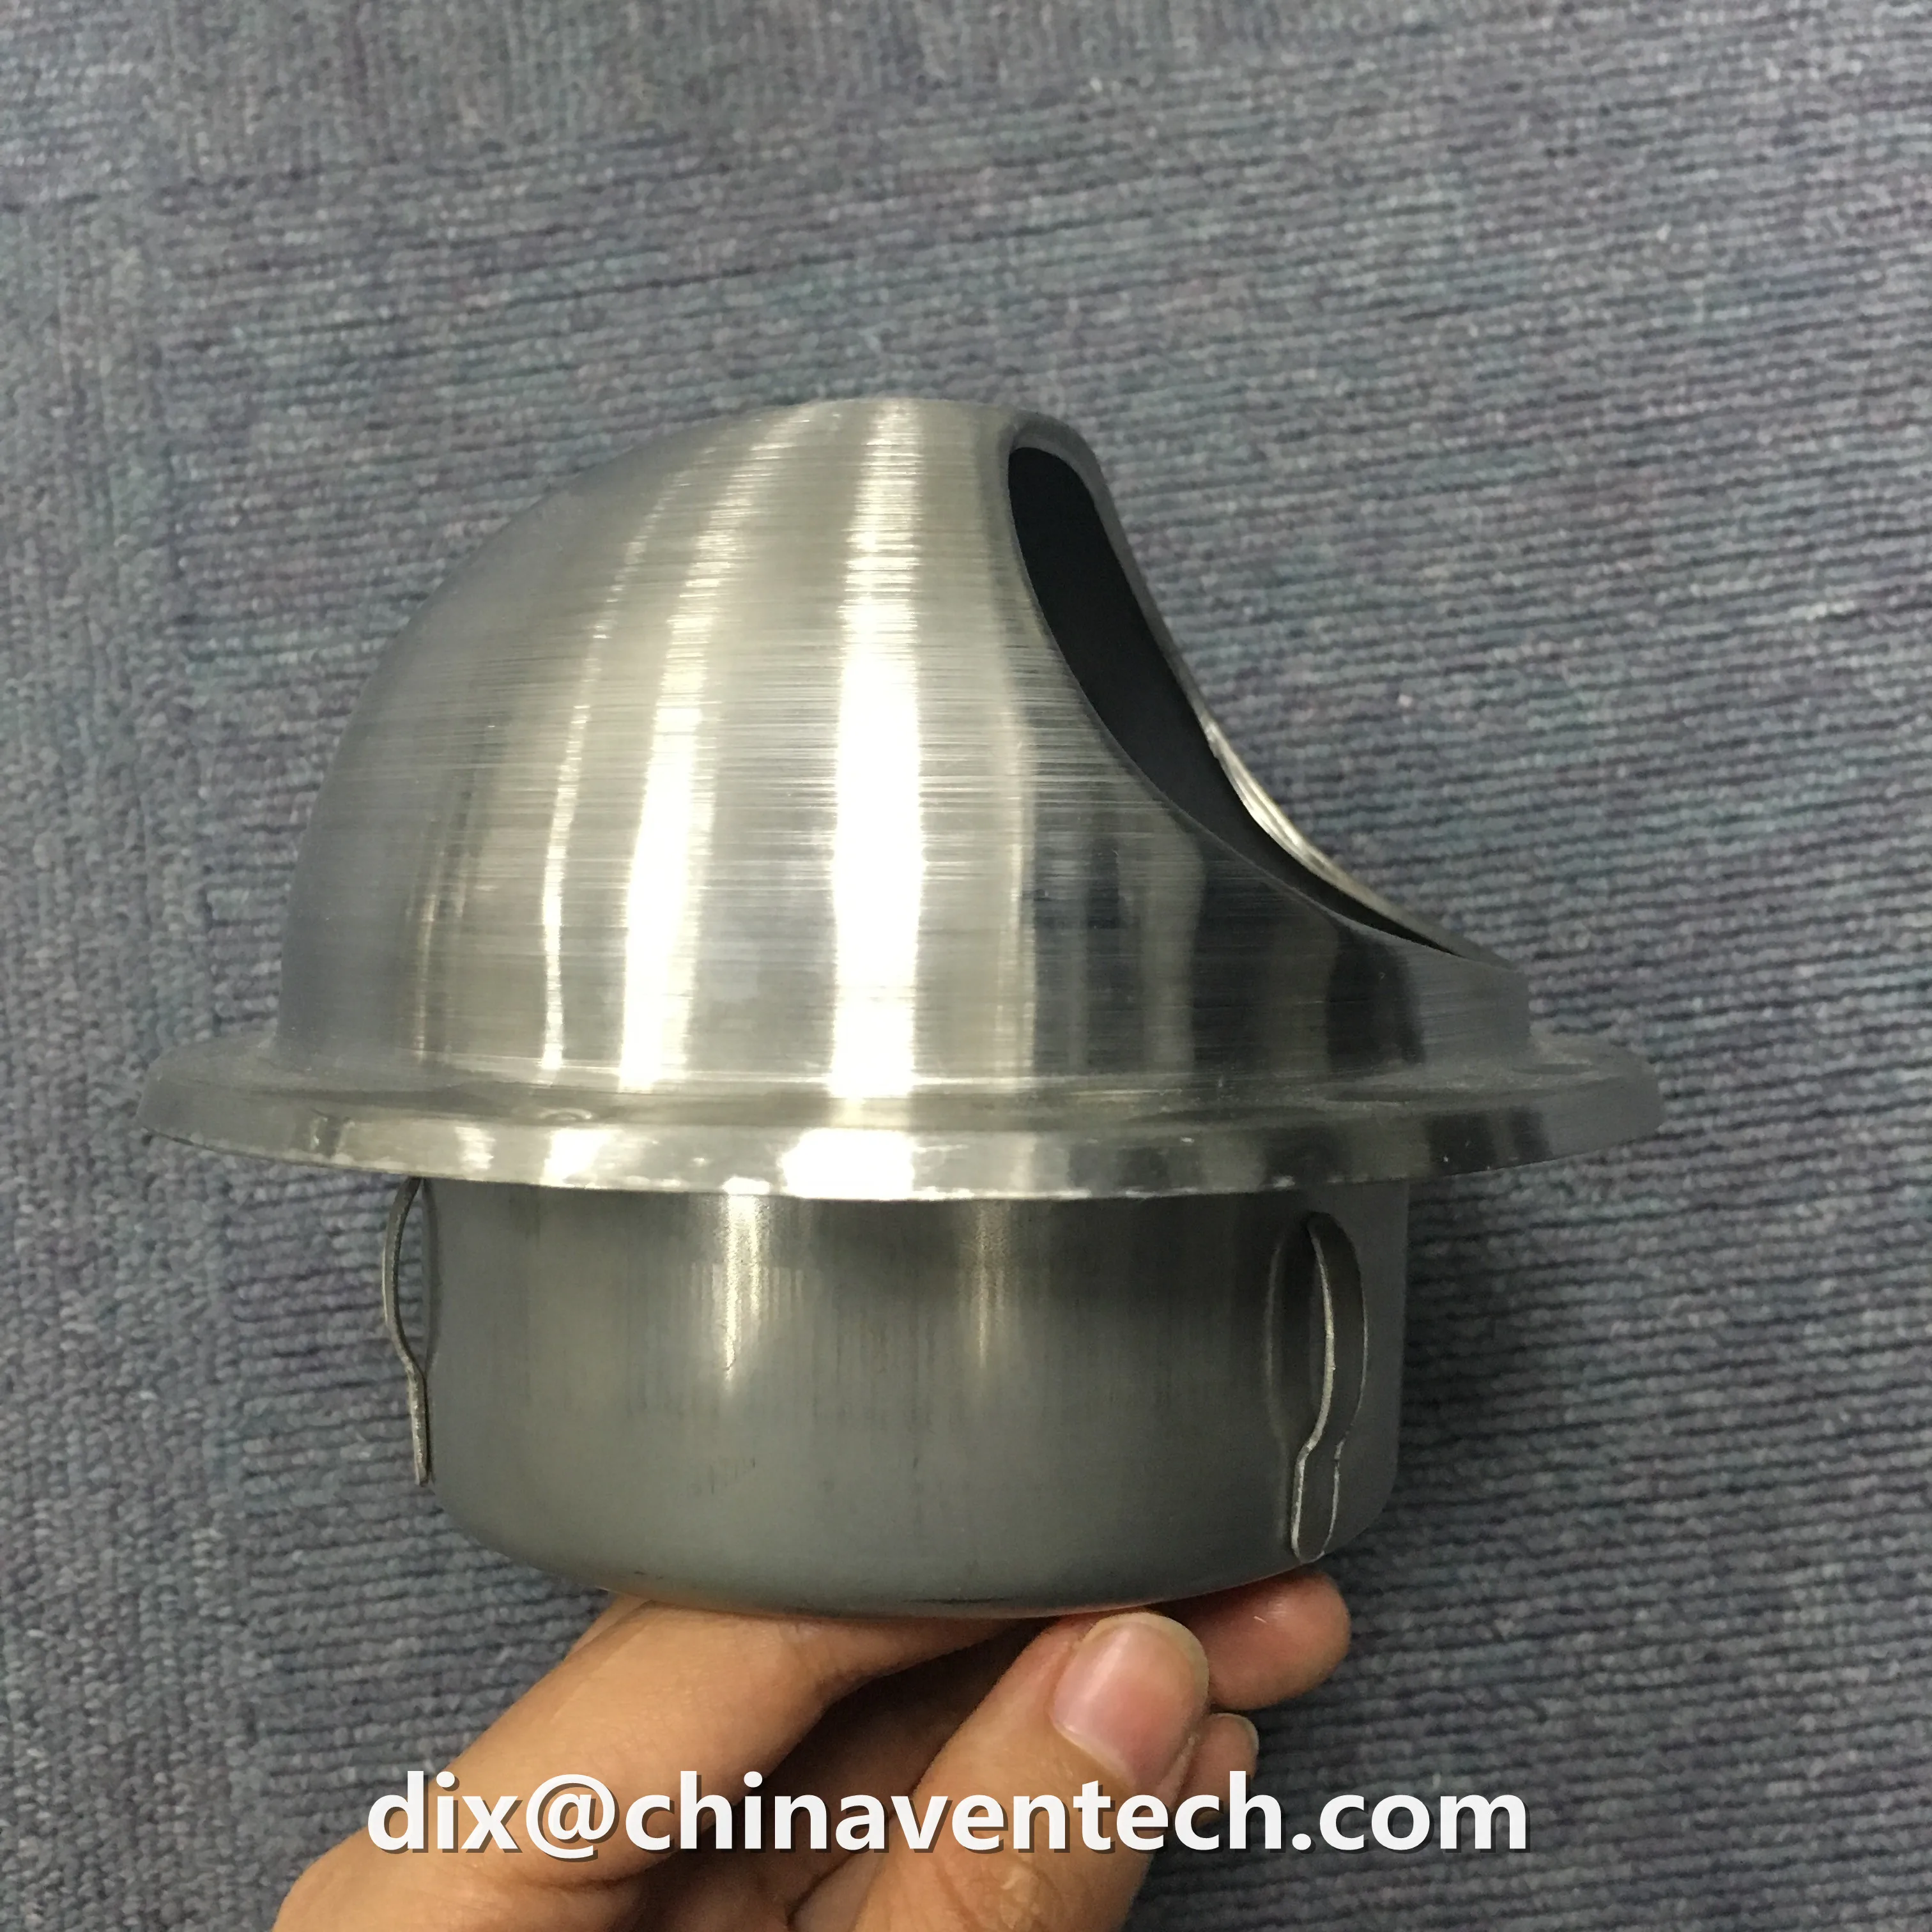 HVAC system 201 stainless steel fresh air vent cover round ball shaped weather louver with insect screen